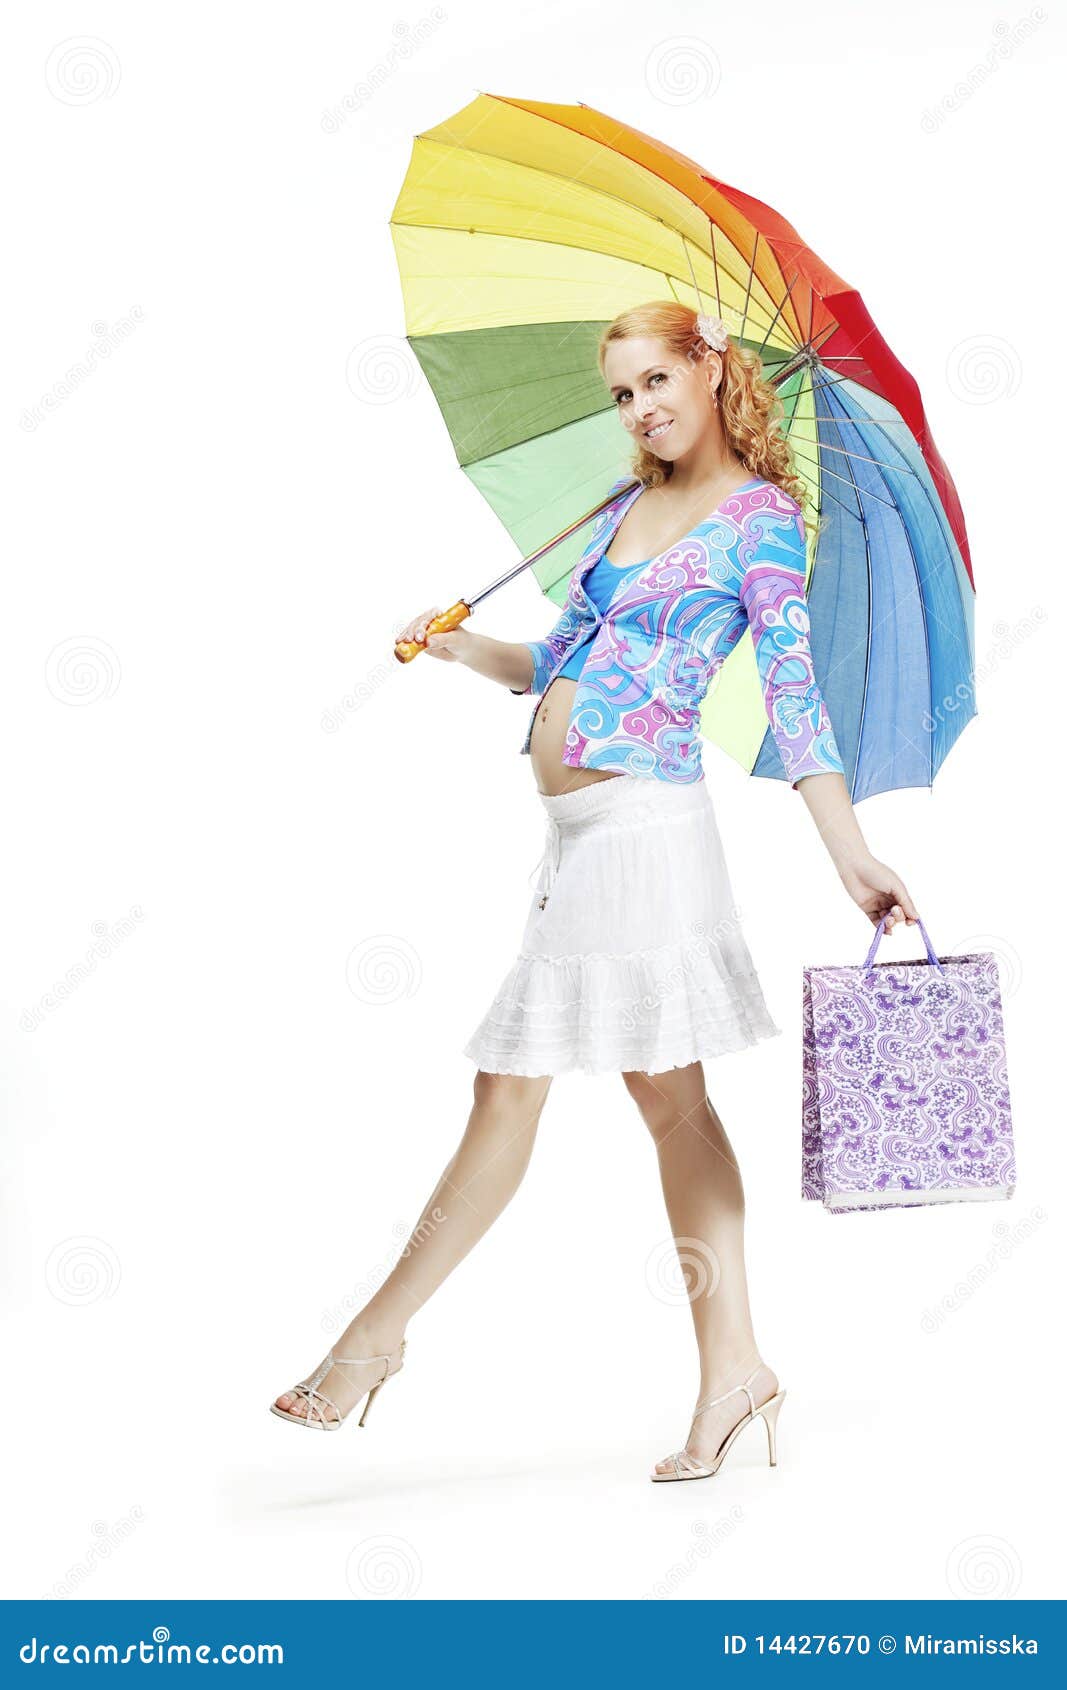 The image of a beautiful pregnant girl with a rainbow umbrella